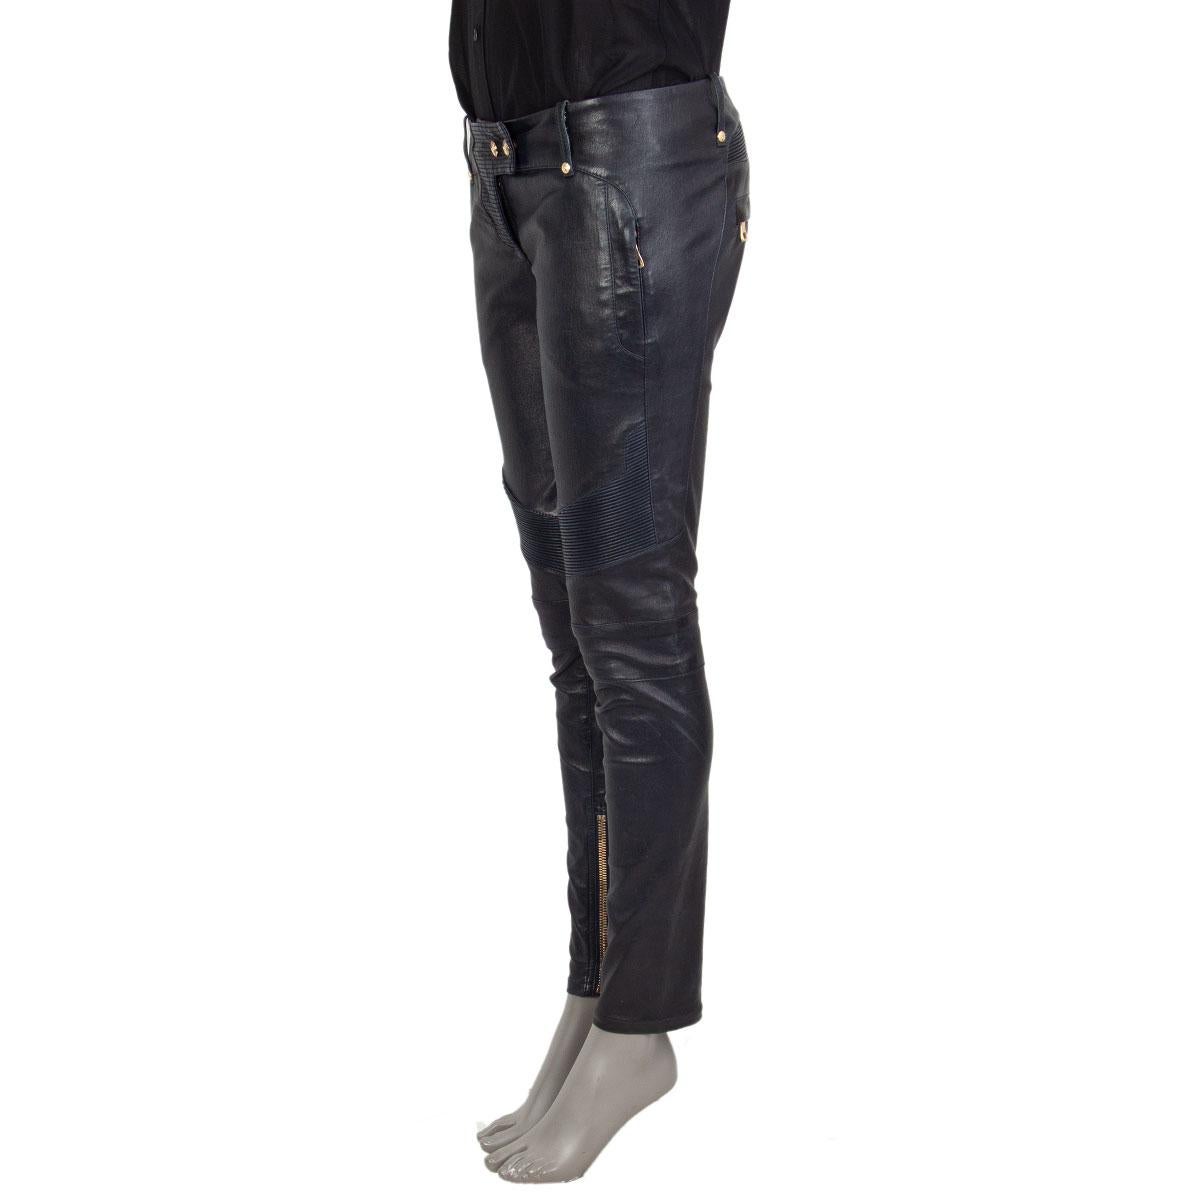 100% authentic Balmain biker pants in midnight blue lambskin with gold tone eagle embossed buttons, front zipper pockets, back zipper pockets and cuff zippers. Close on the front with a zipper and buttons. Doublure is cotton (100%). Have been worn